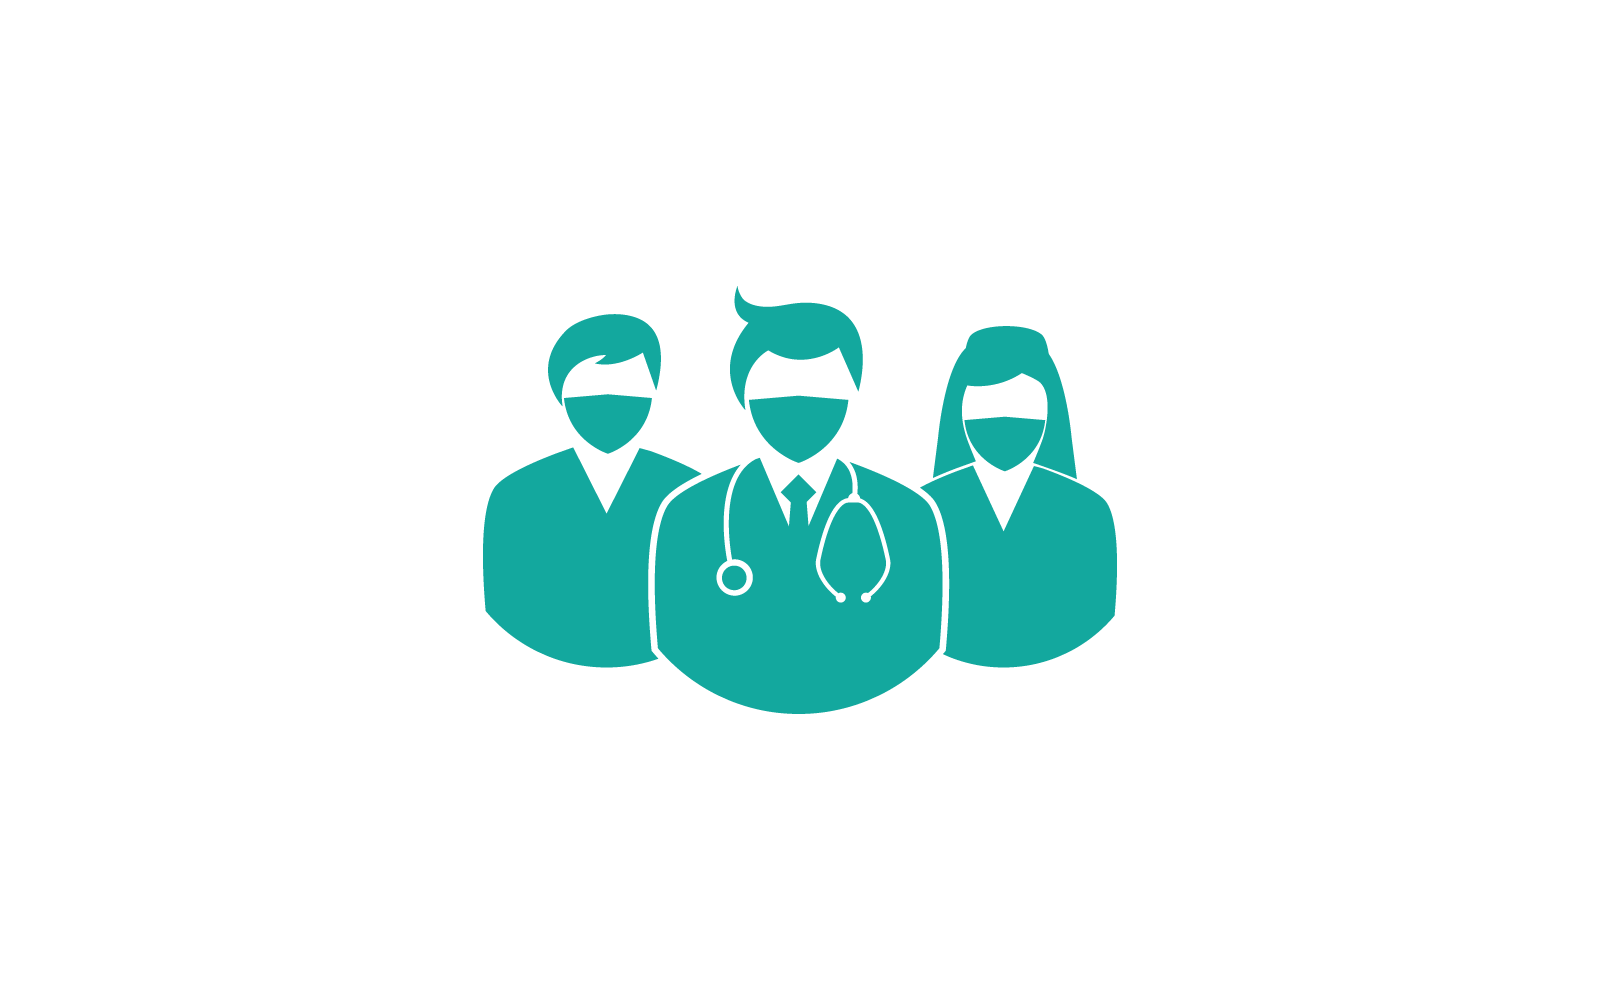 Illustration of health workers,doctor and nurse